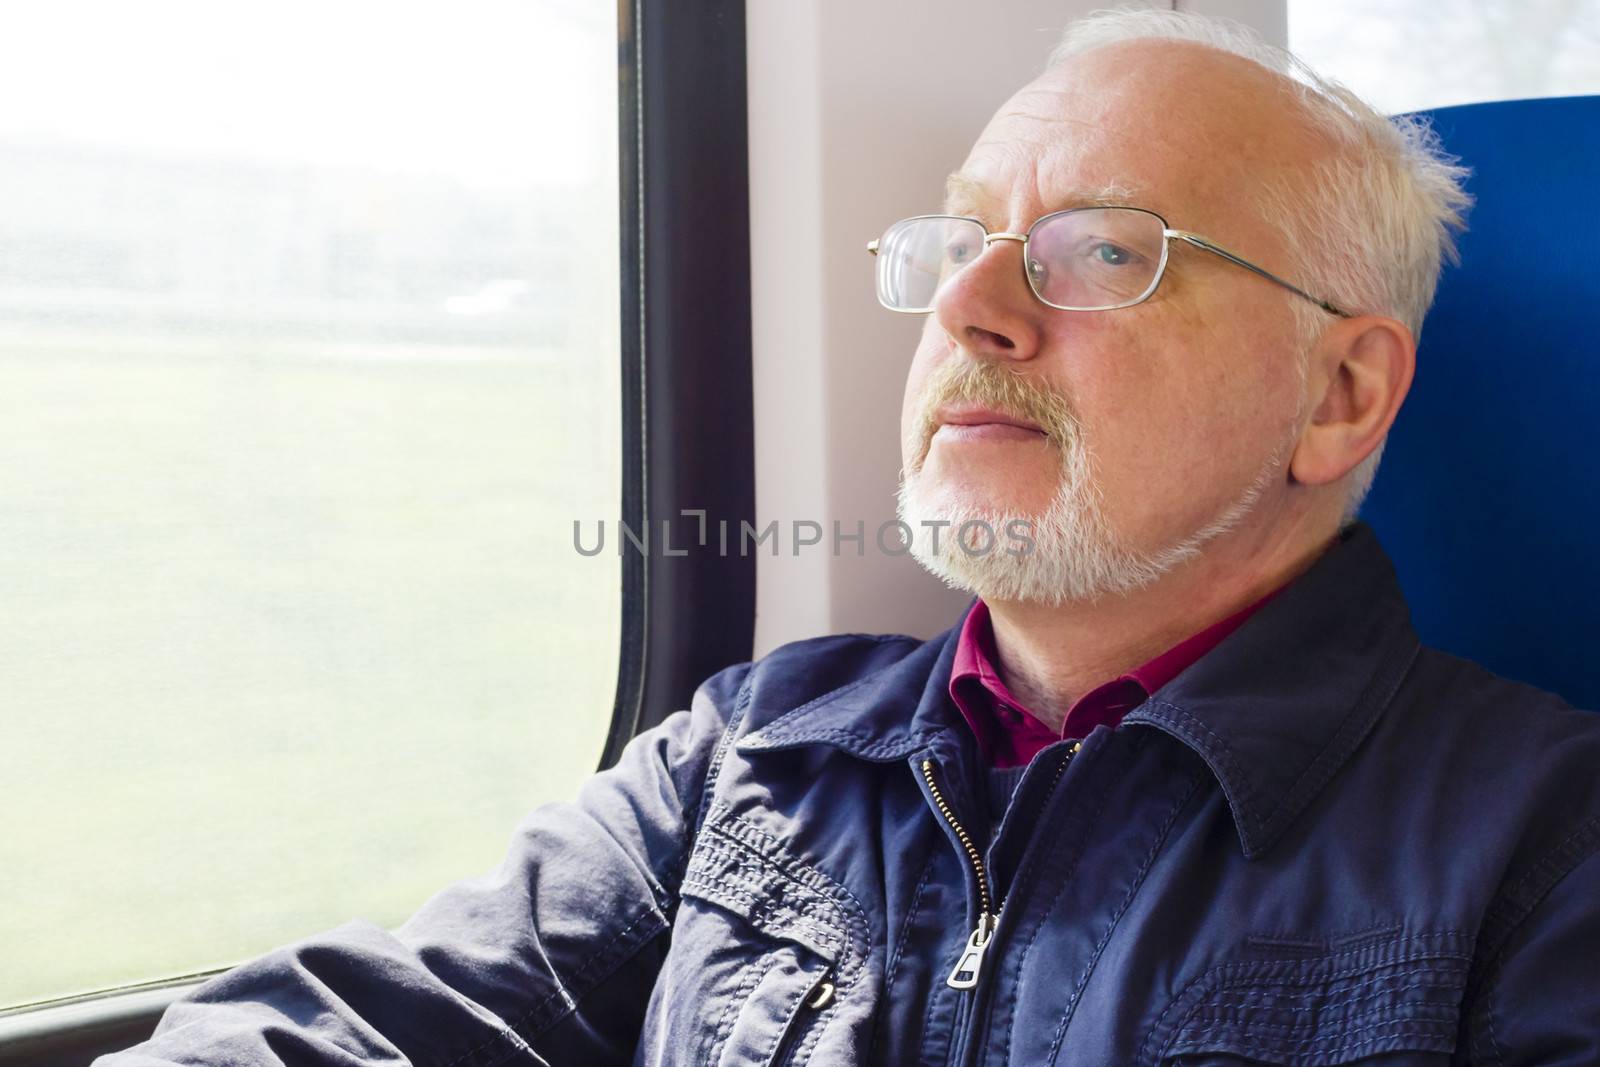 Relaxed old man sitting near the window in the carriage